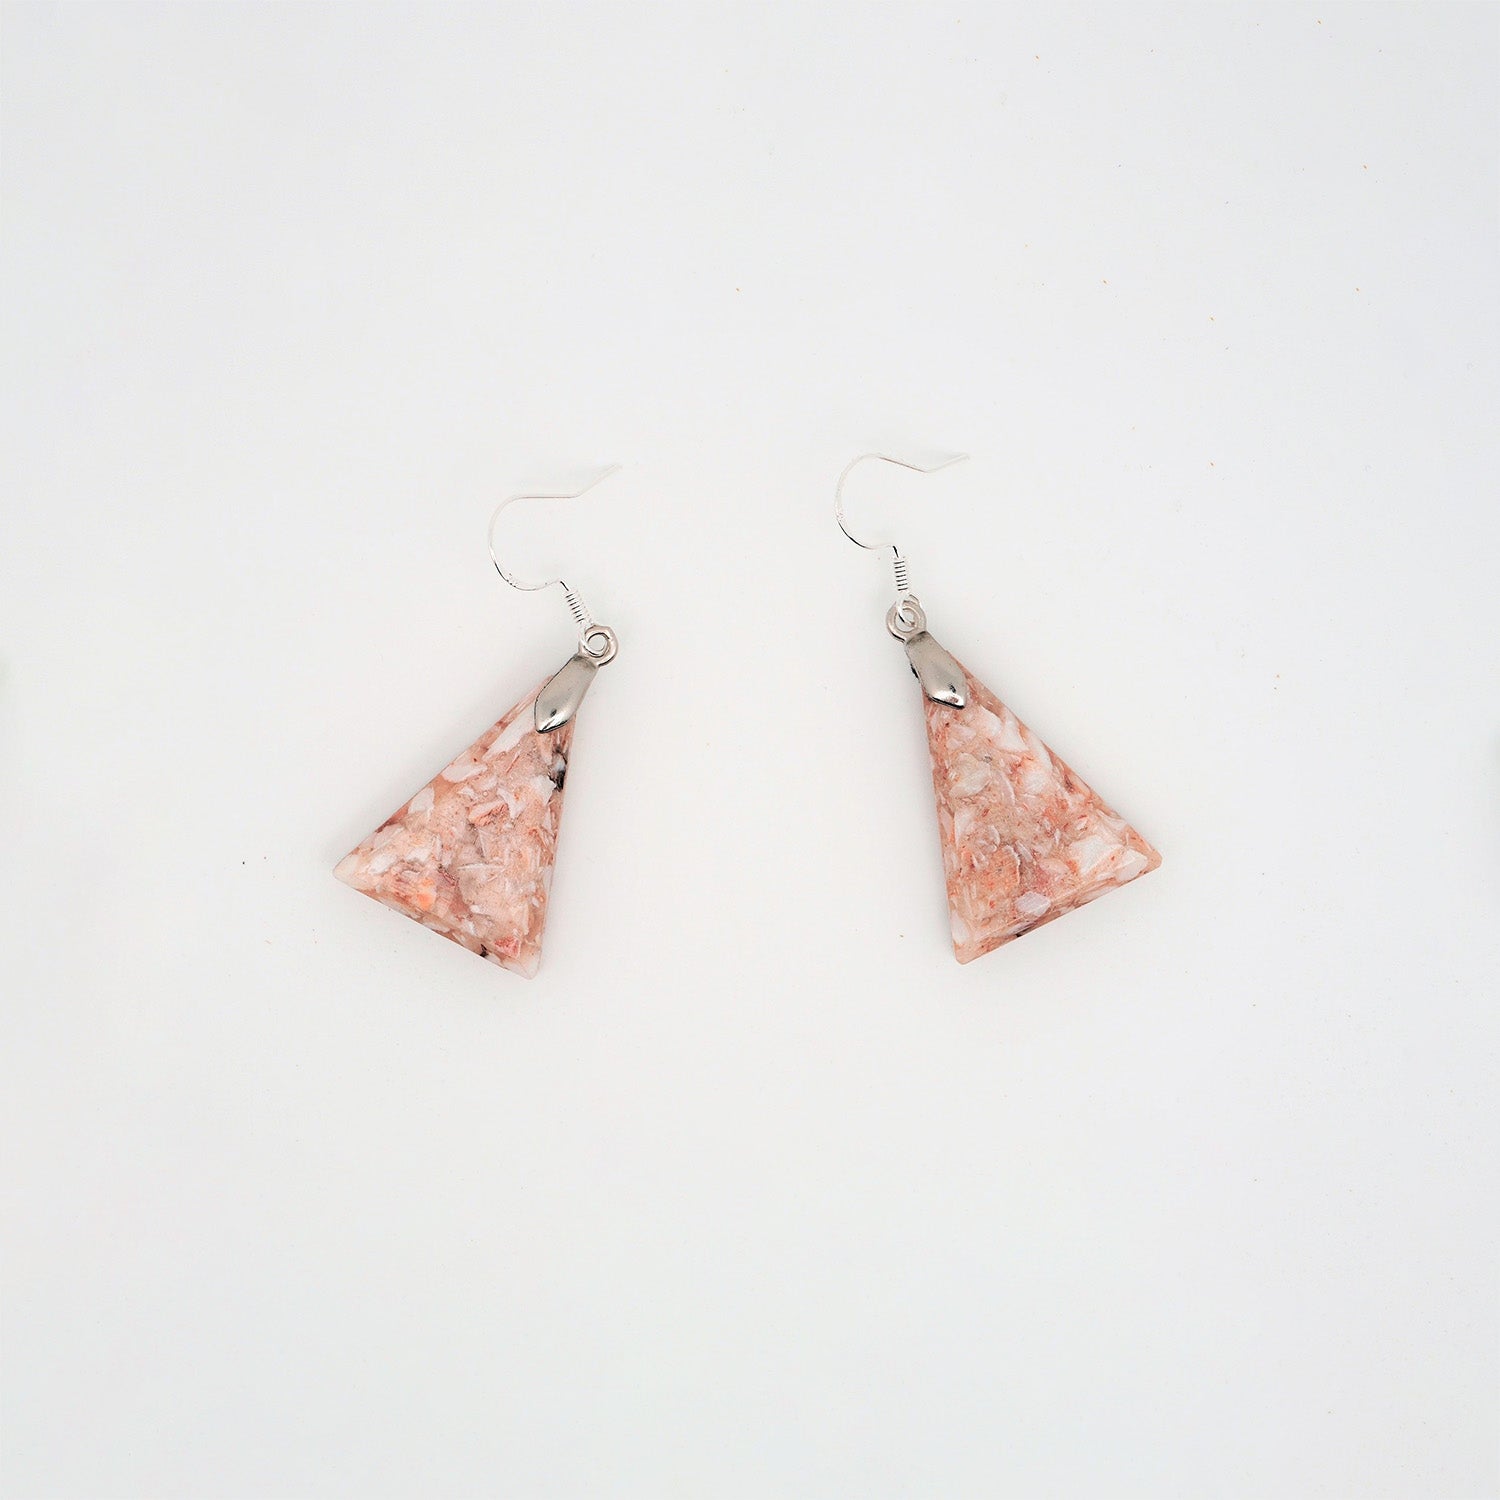 Triangle earrings made from recycled scallop shells